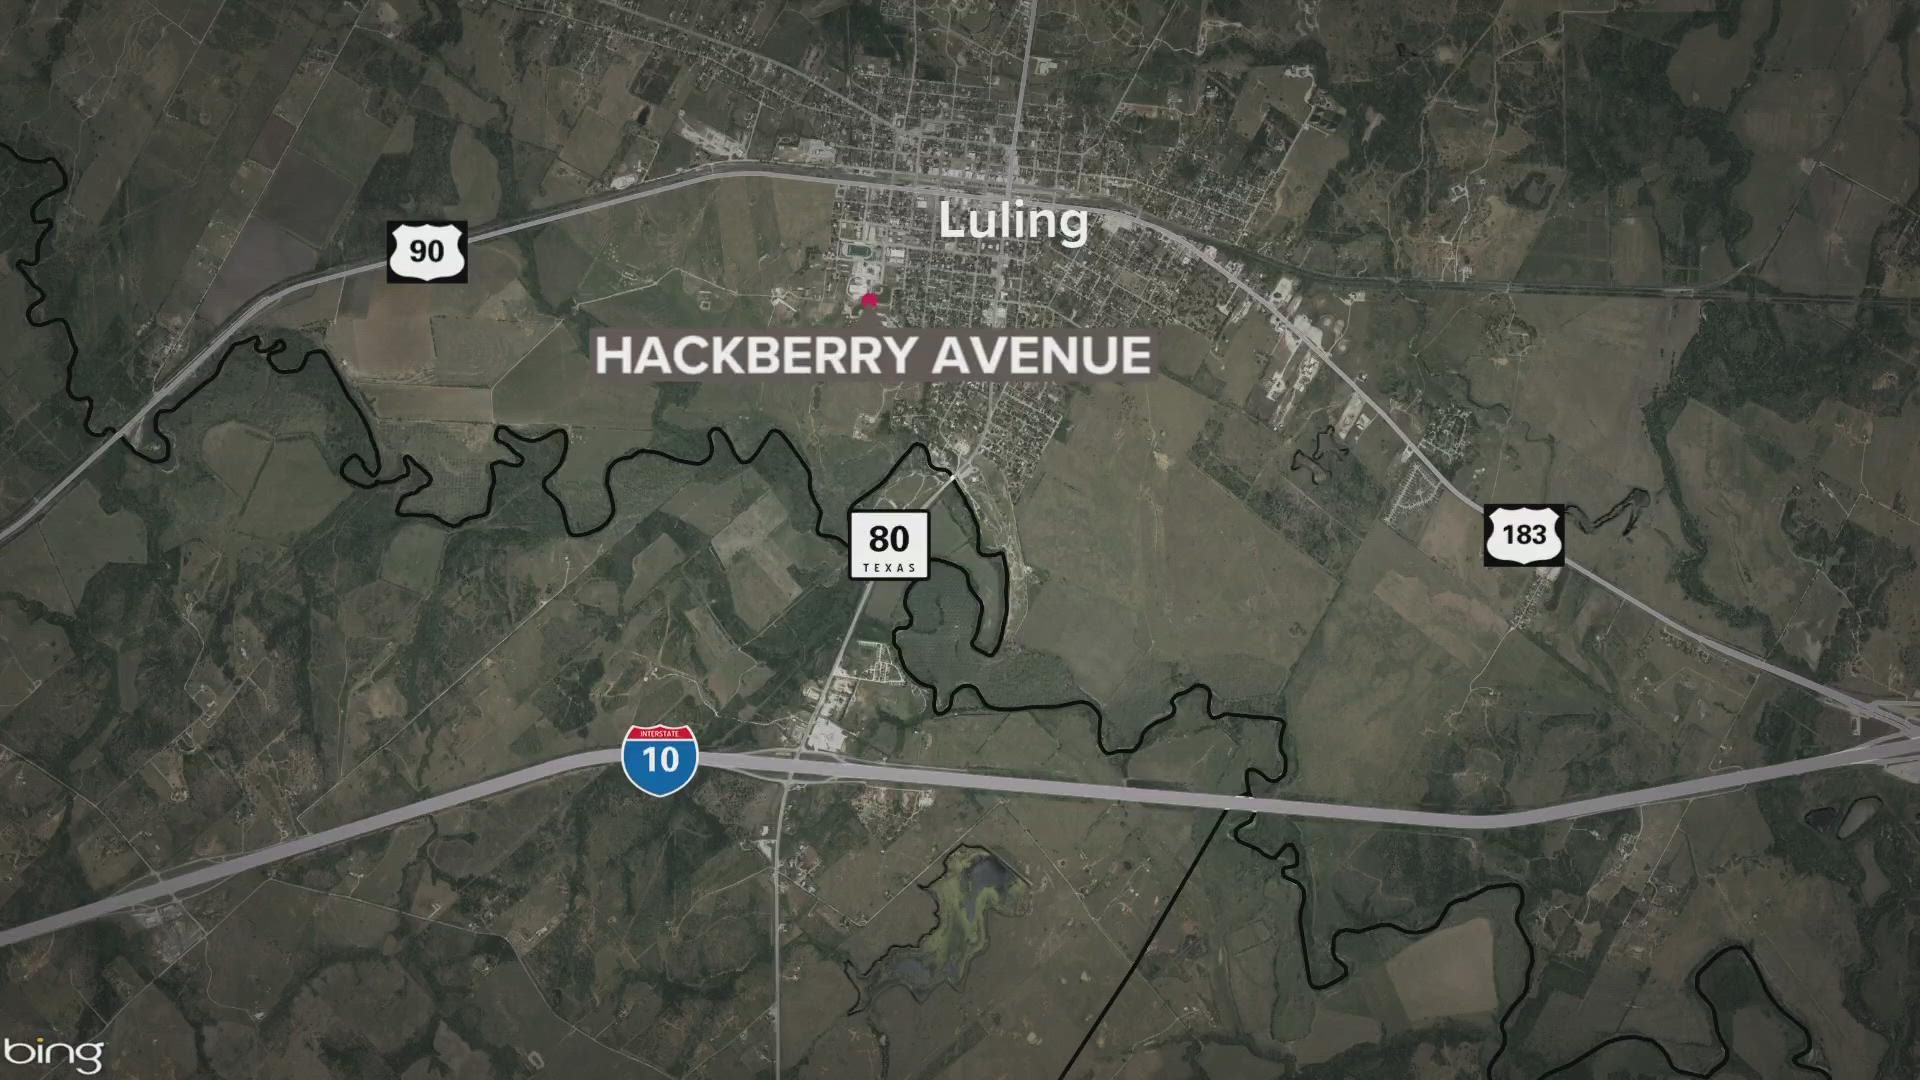 Luling police say a family's dog brought the skull to their yard on Hackberry Avenue on Thursday evening.